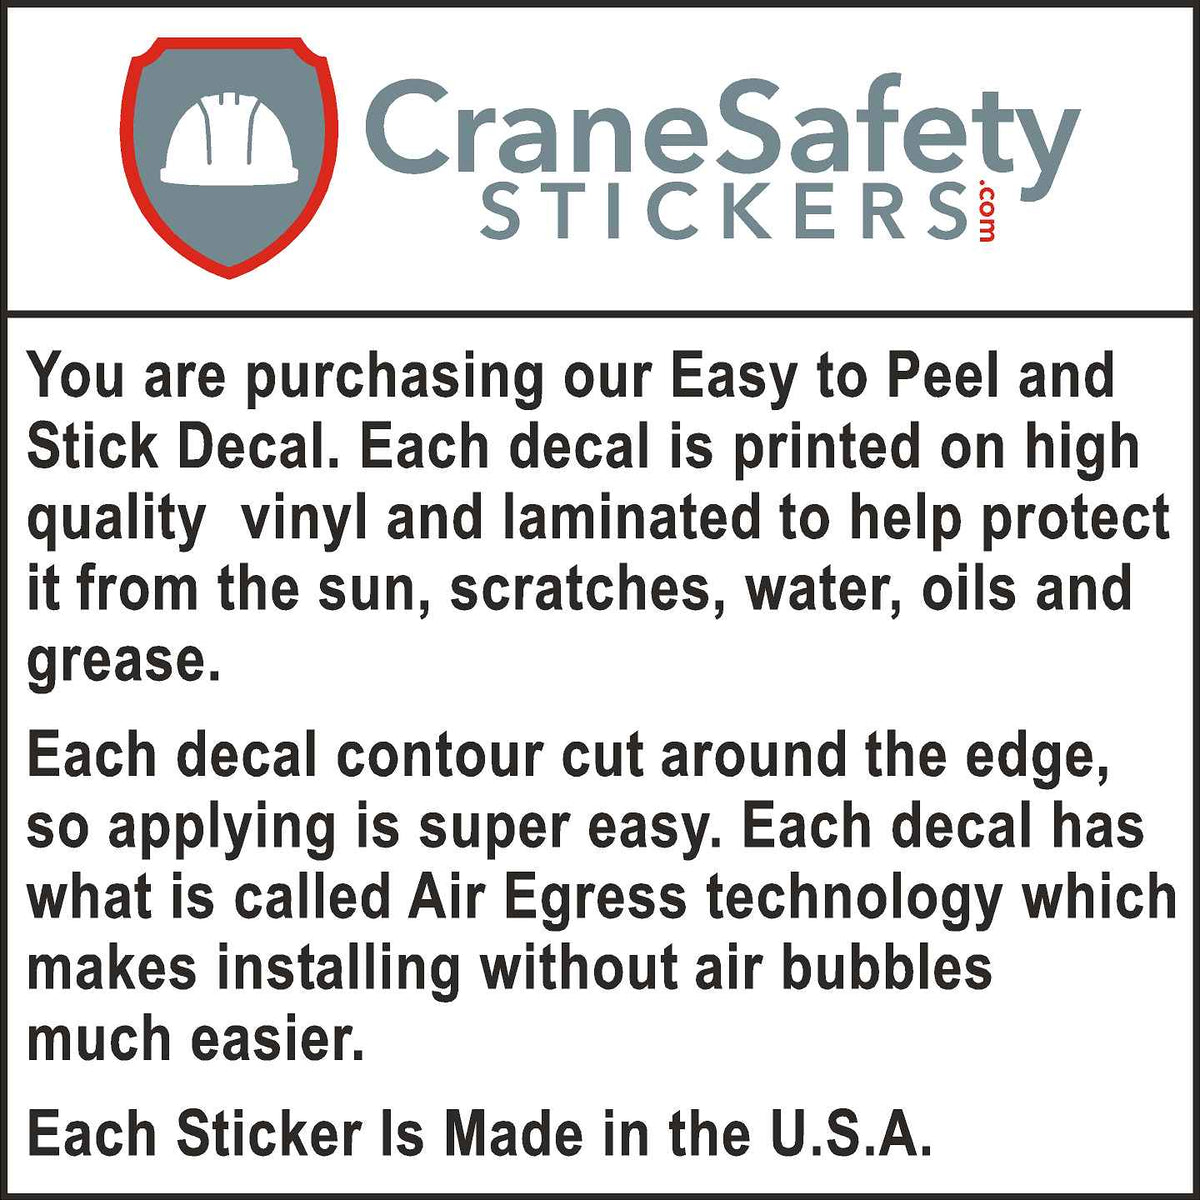 The quality of our safety and award winner stickers.